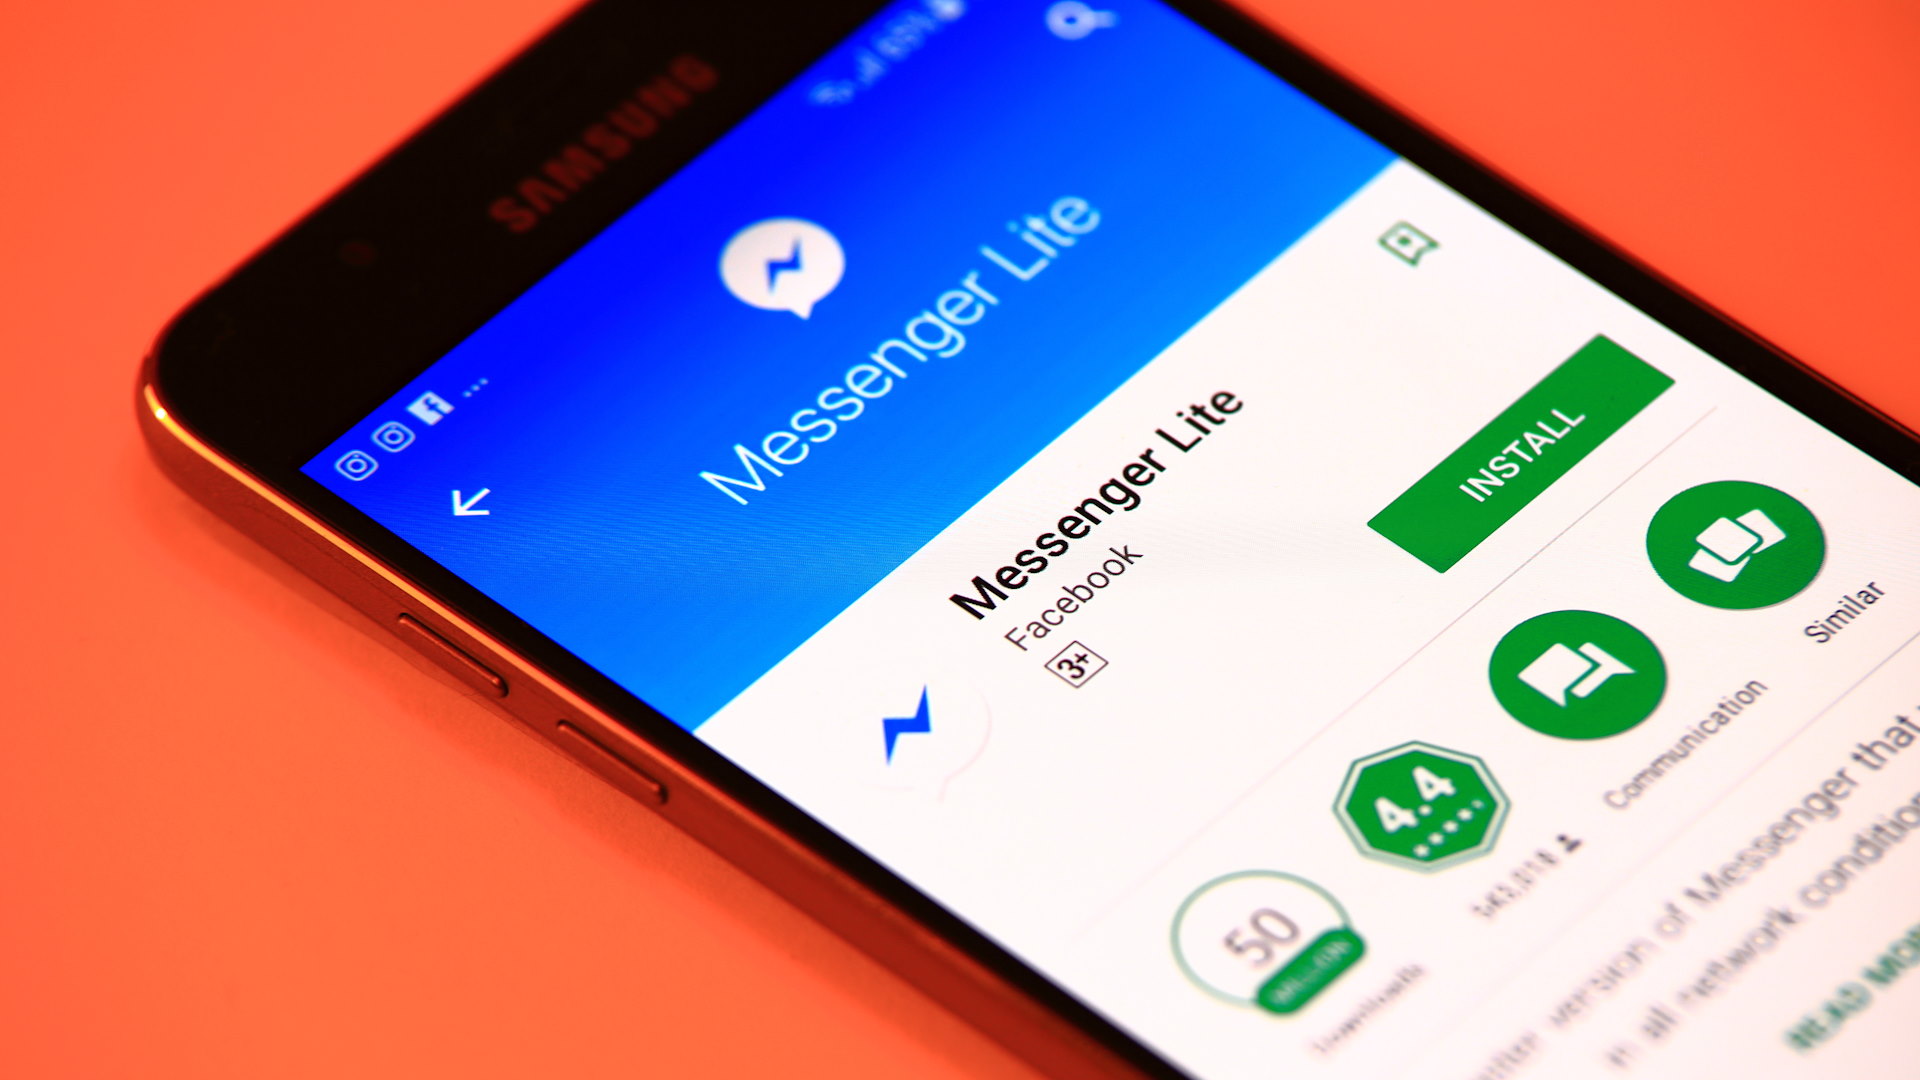 Meta discontinues Messenger Lite for Android